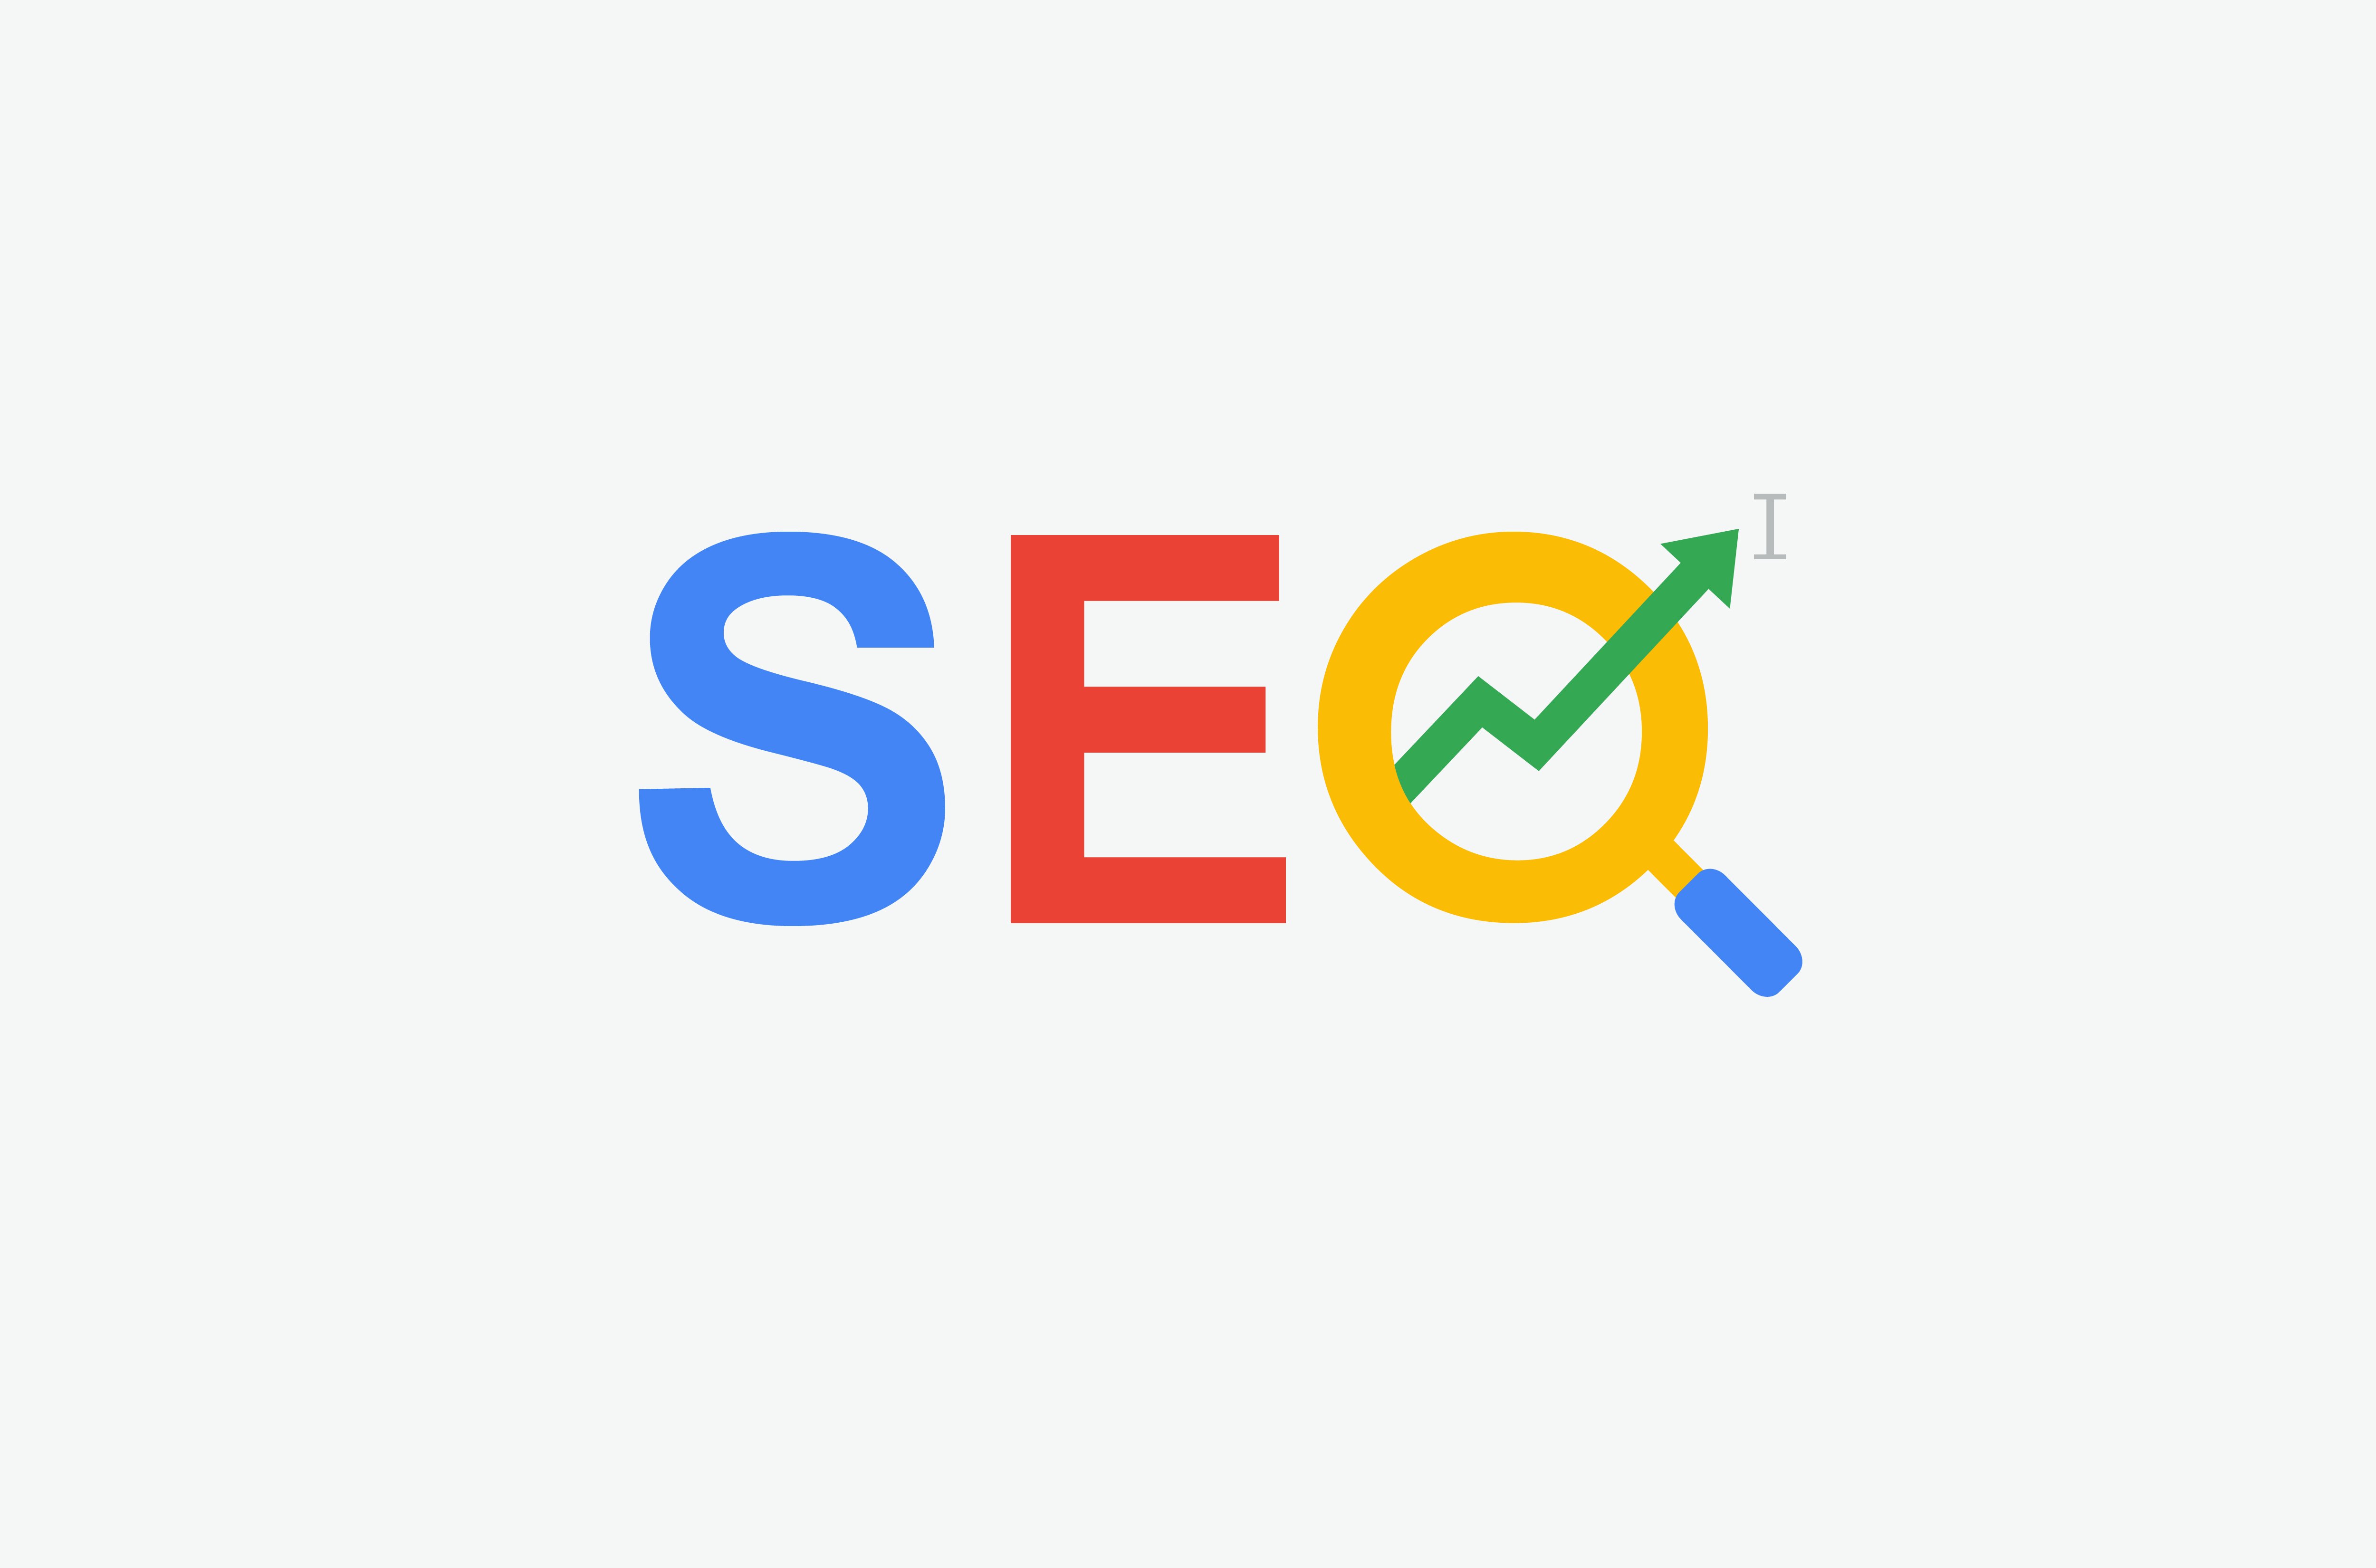 The word "SEO"  typed in font that resembles Google logo